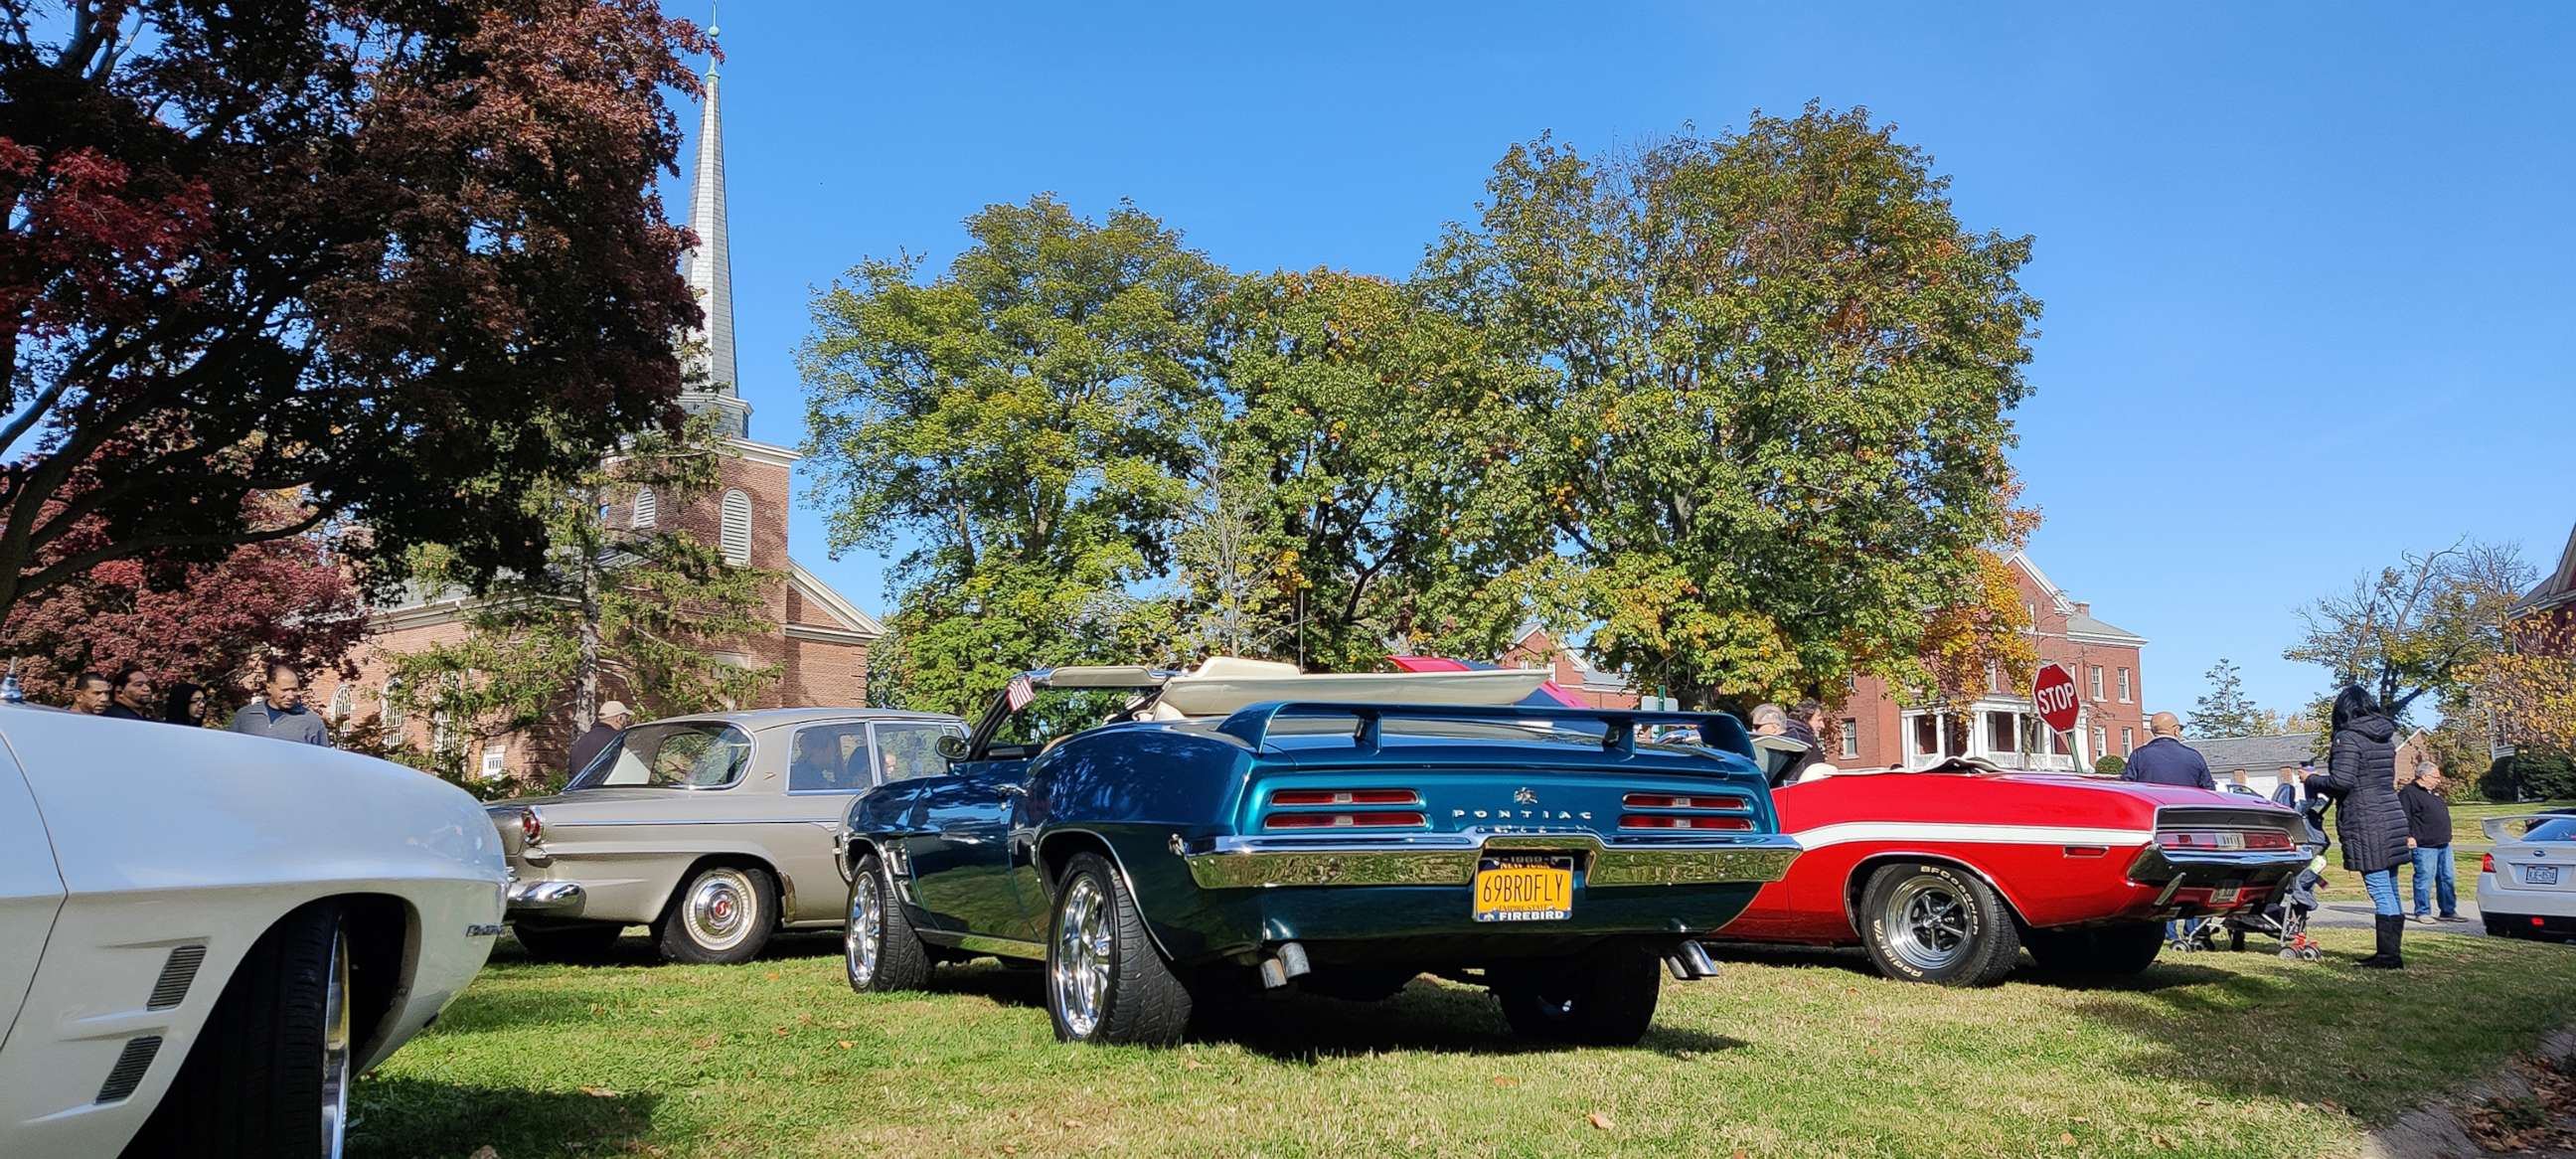 PHOTO: A Pontiac Firebird and a Dodge Challenger are seen at a classic car show in Queens, N.Y., November 2021.